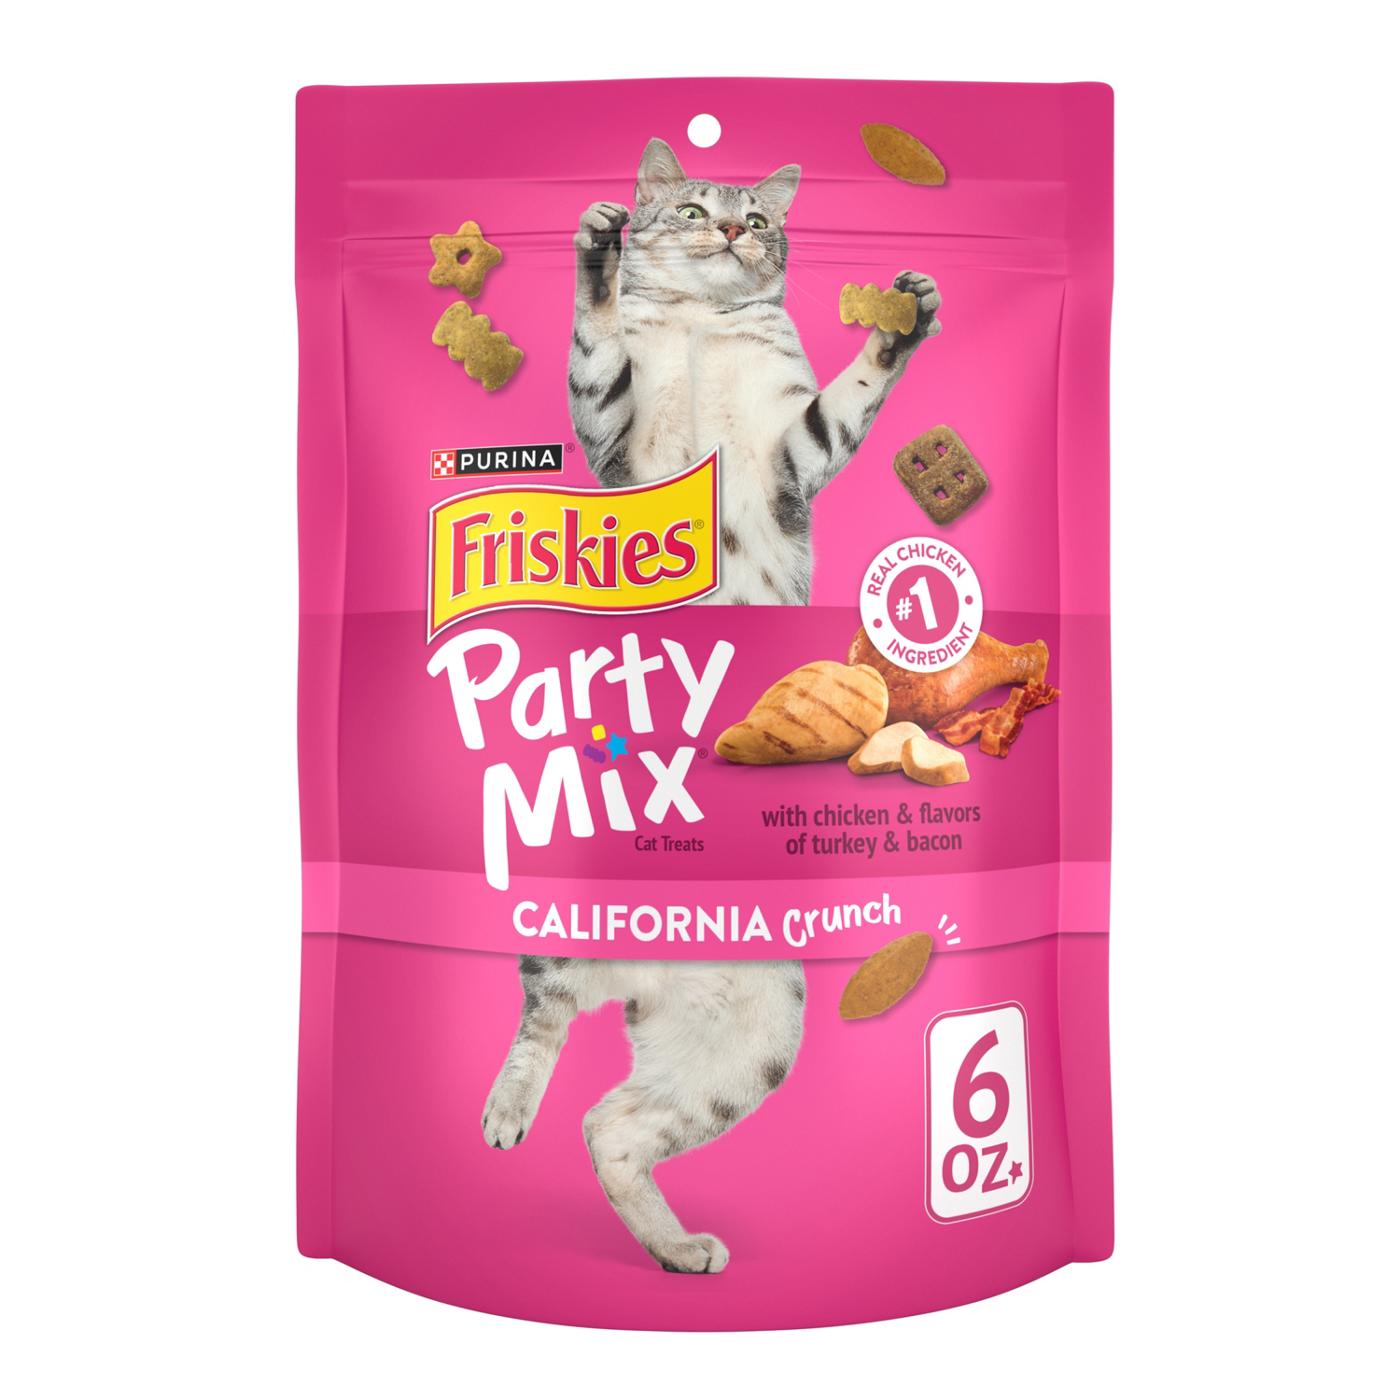 Friskies Purina Friskies Made in USA Facilities Cat Treats, Party Mix California Crunch With Chicken; image 1 of 5